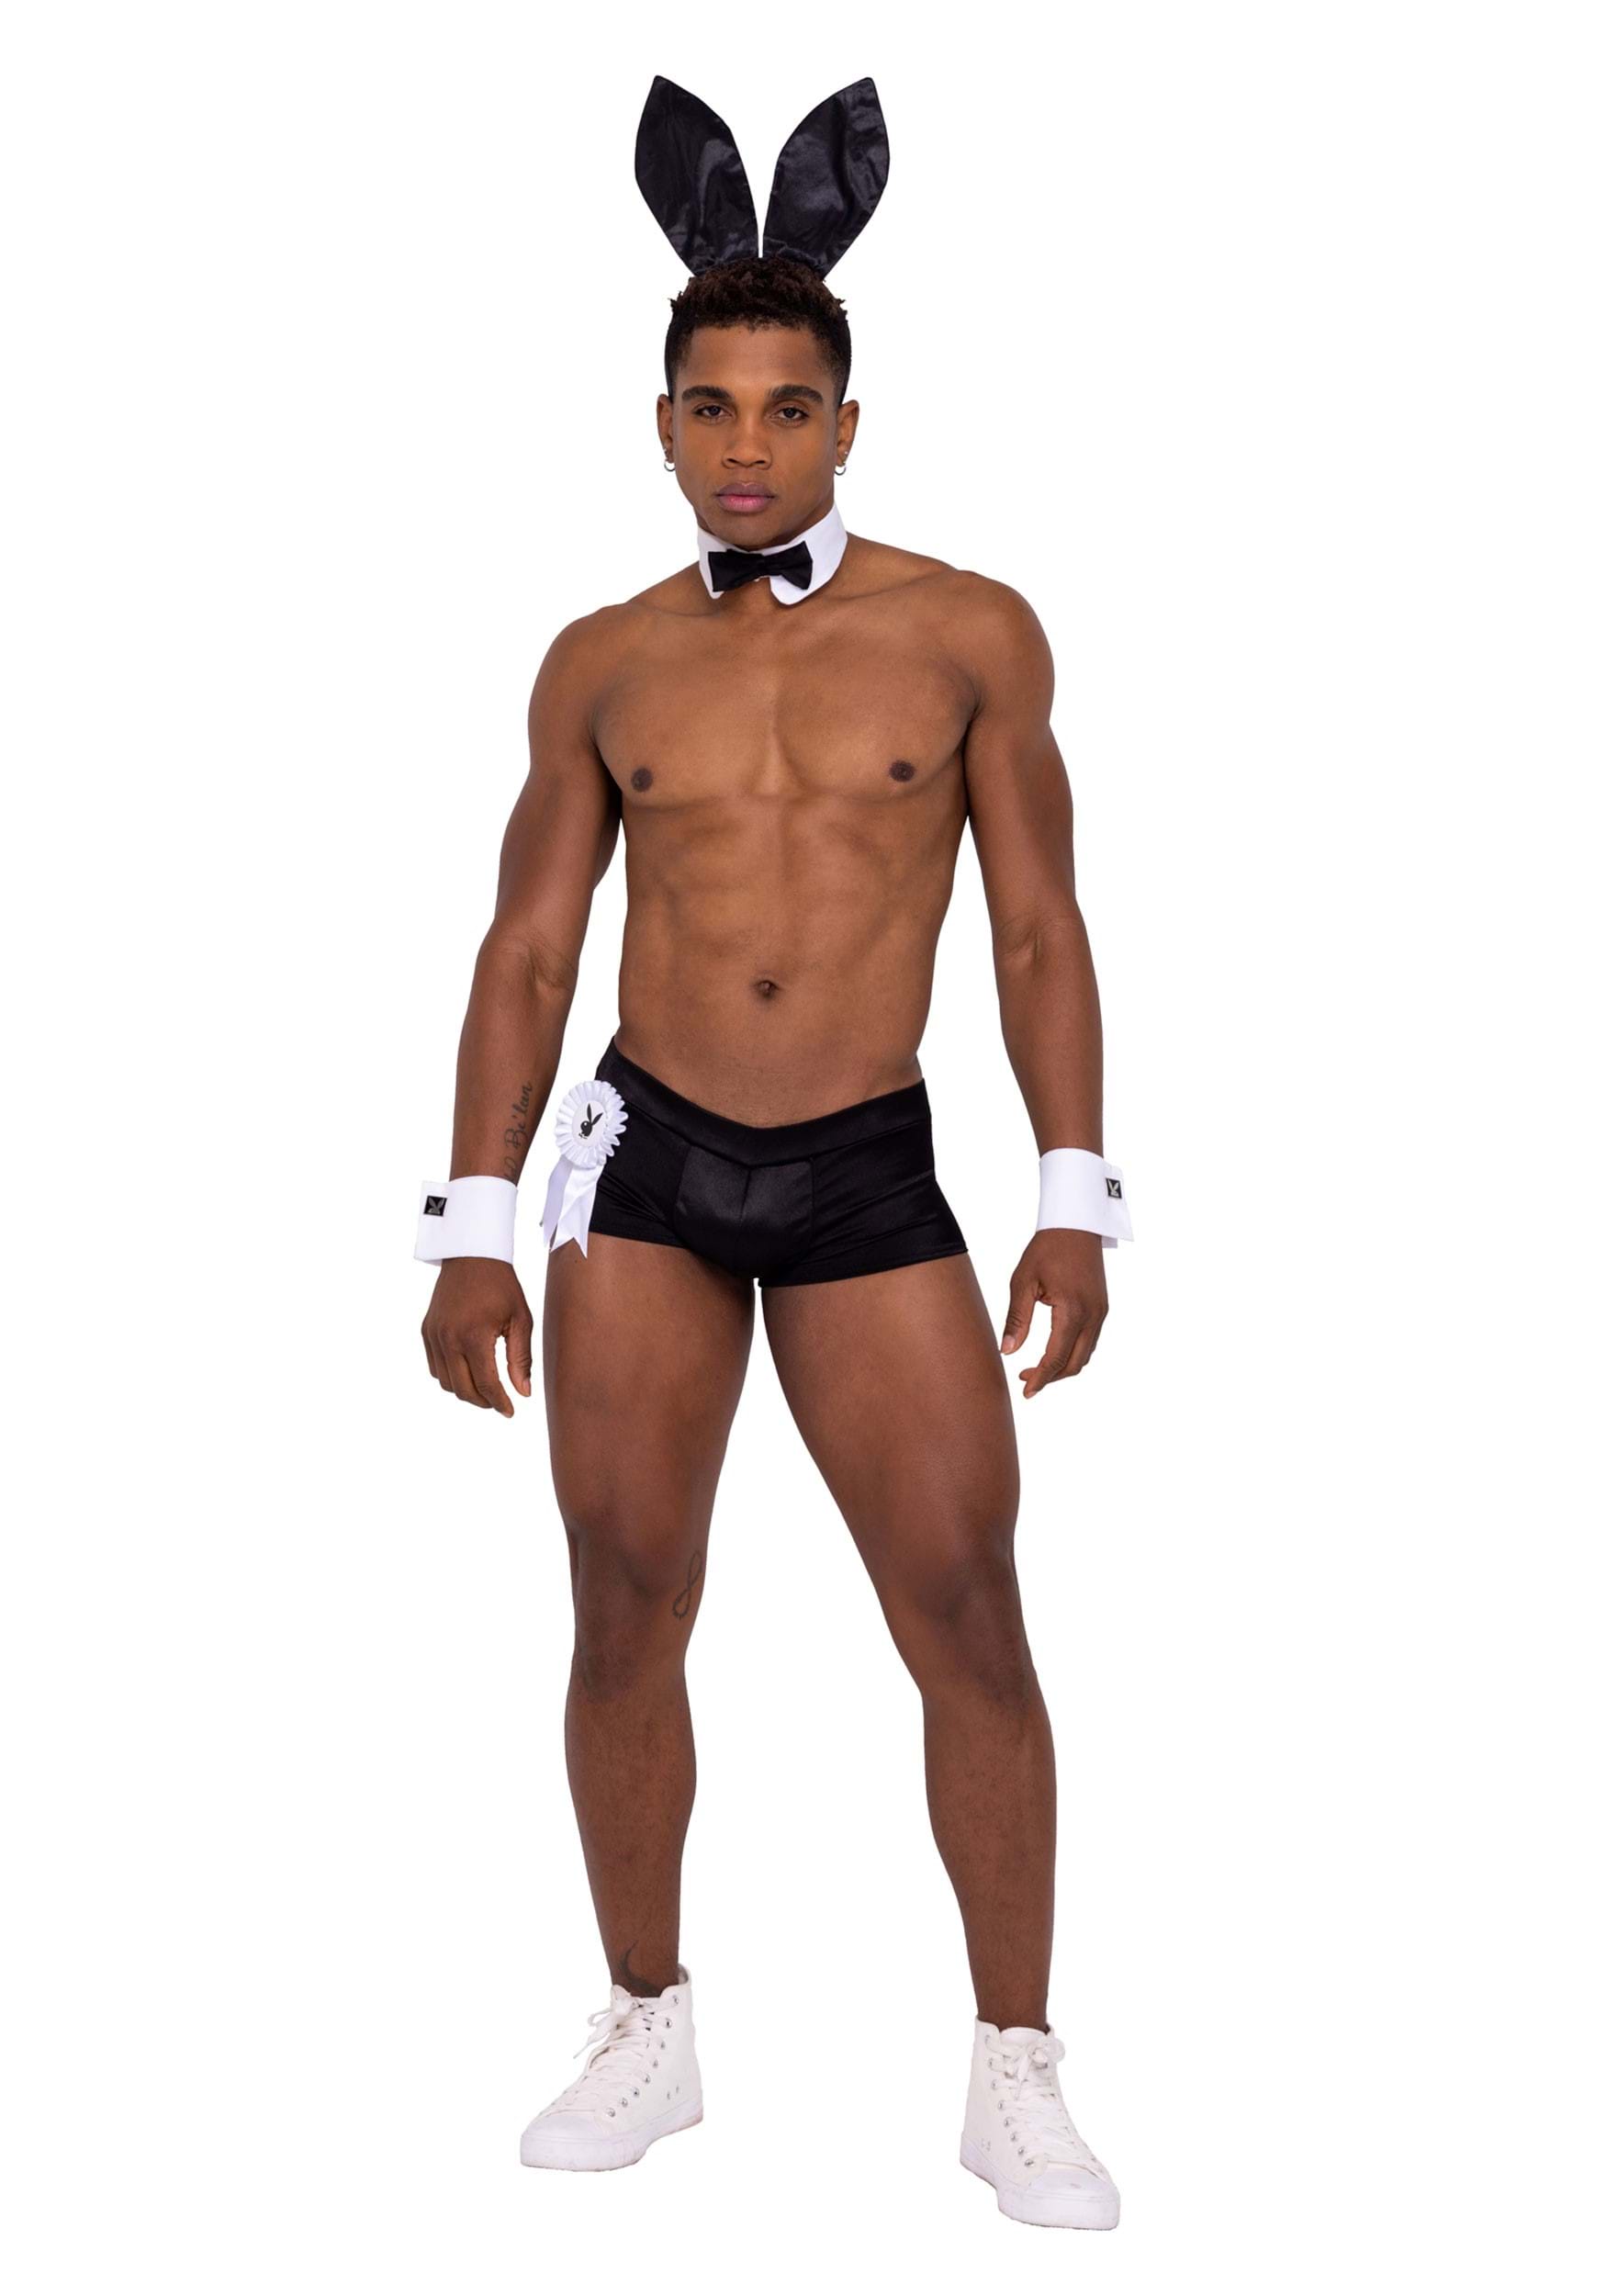 Image of Men's Playboy Hunky Playmate Costume | Playboy Bunny Costumes ID ROPB154-L